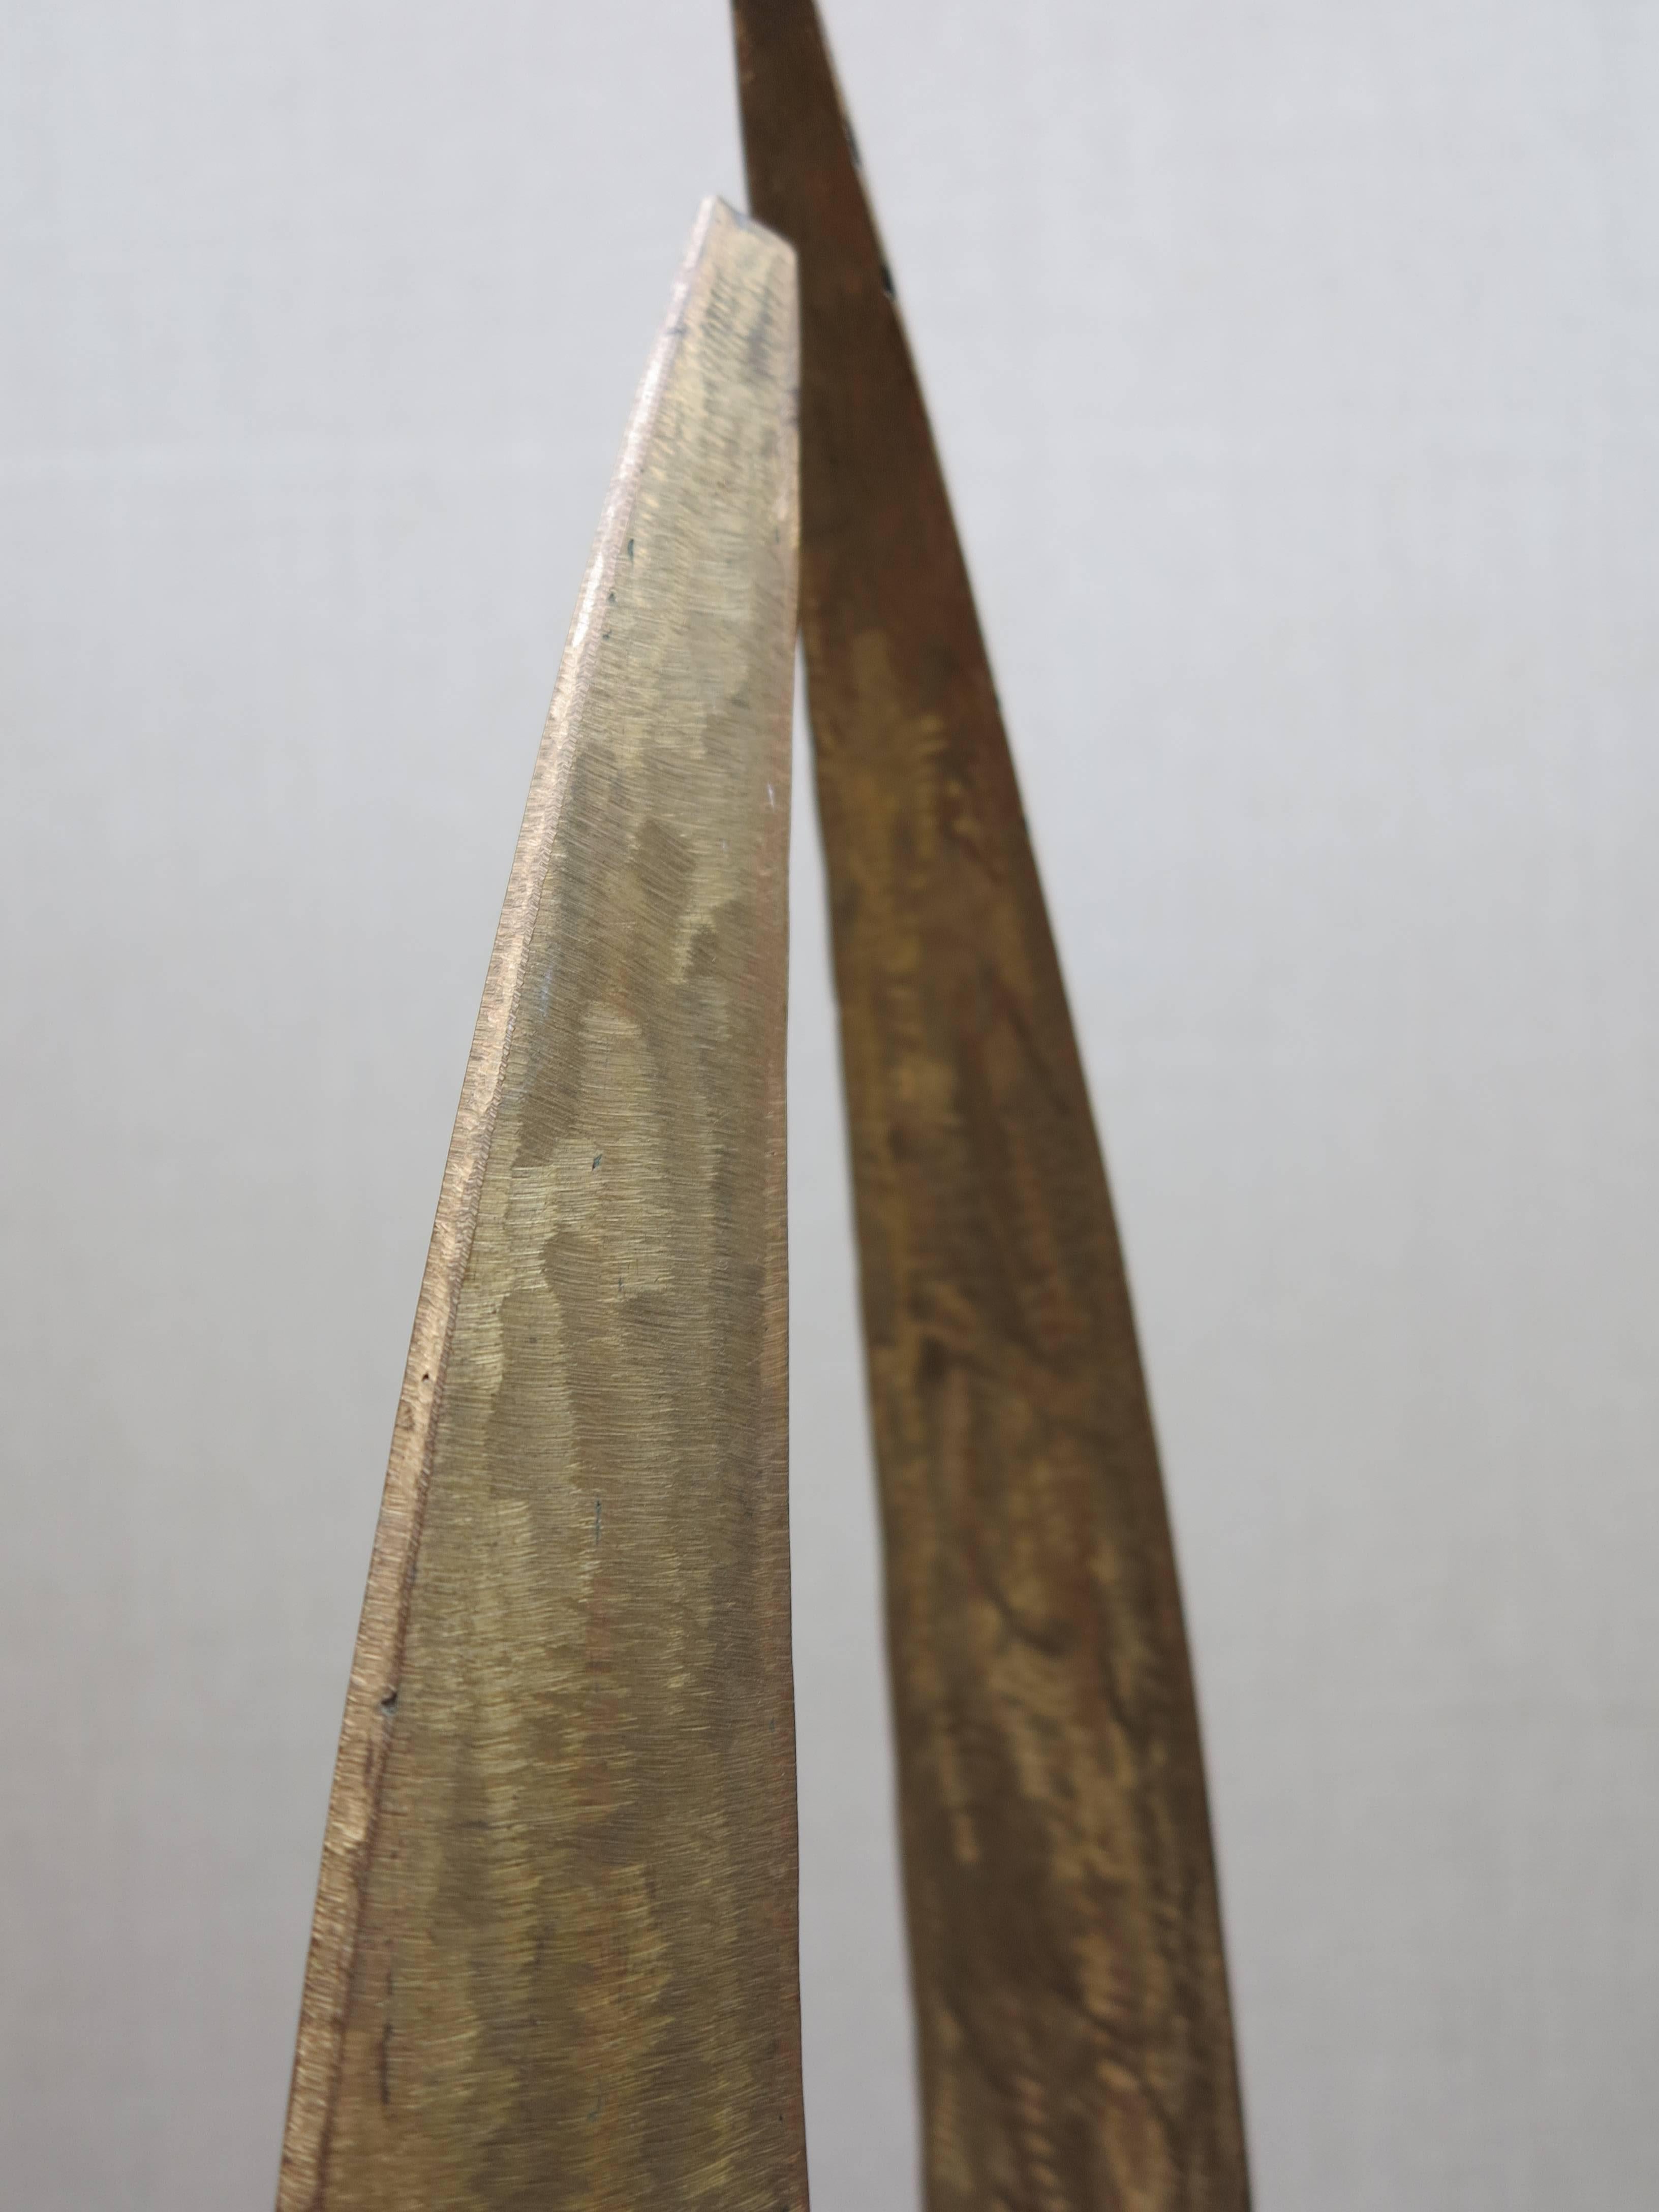 Untitled (abstract bronze sculpture) - Gold Abstract Sculpture by Raymond Granville Barger